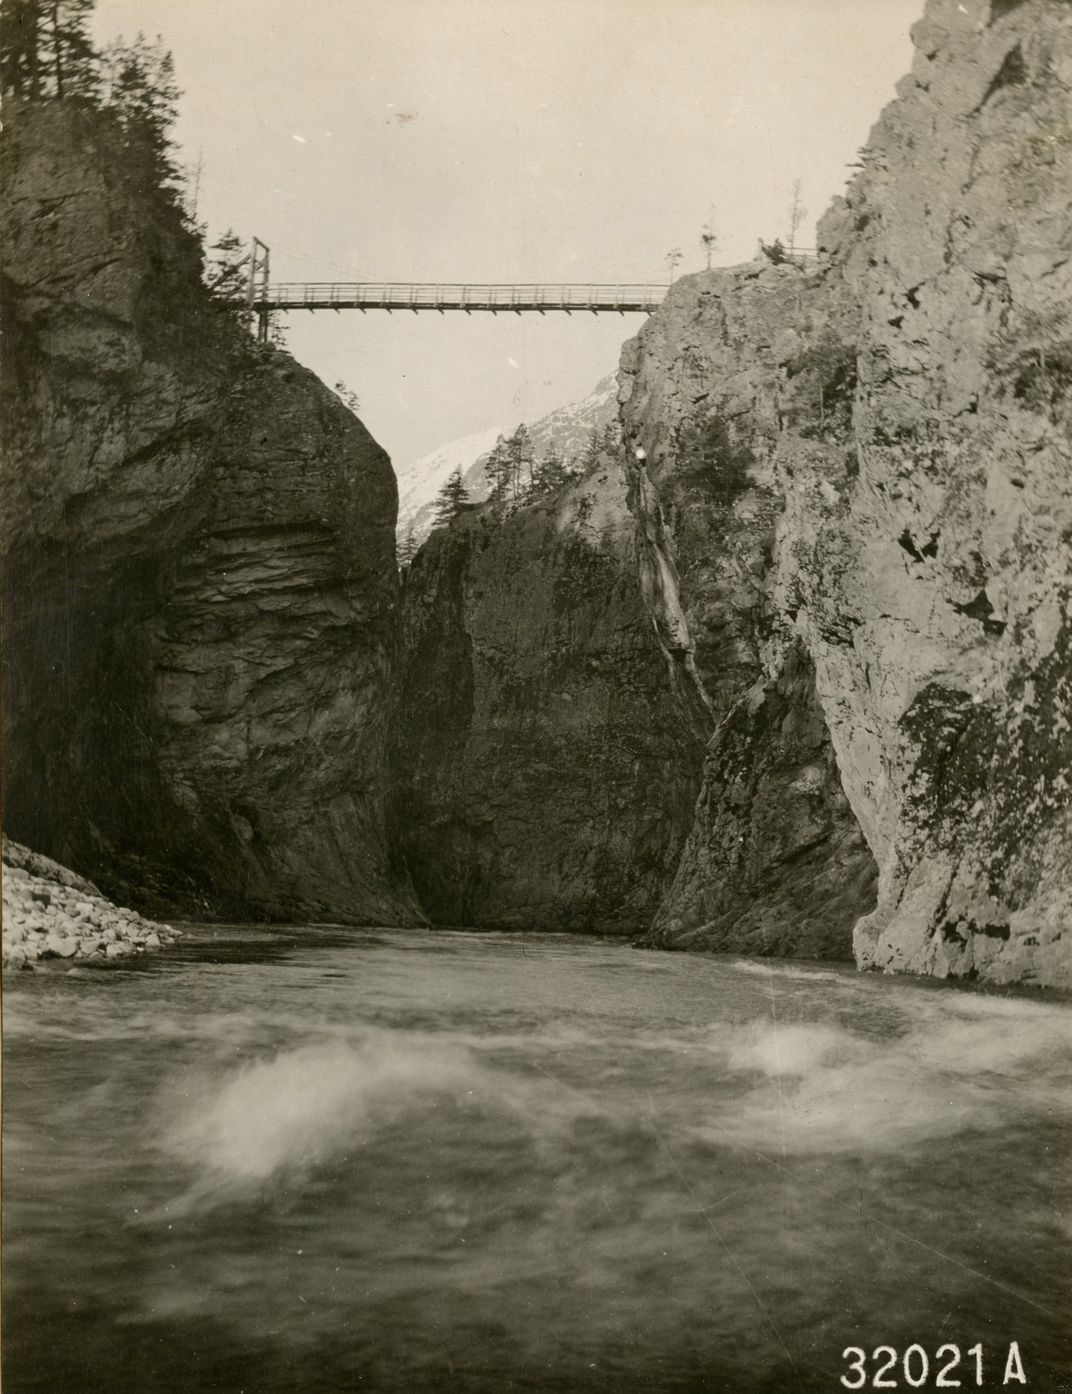 Proposed dam site on the Skagit River, photographed in 1914